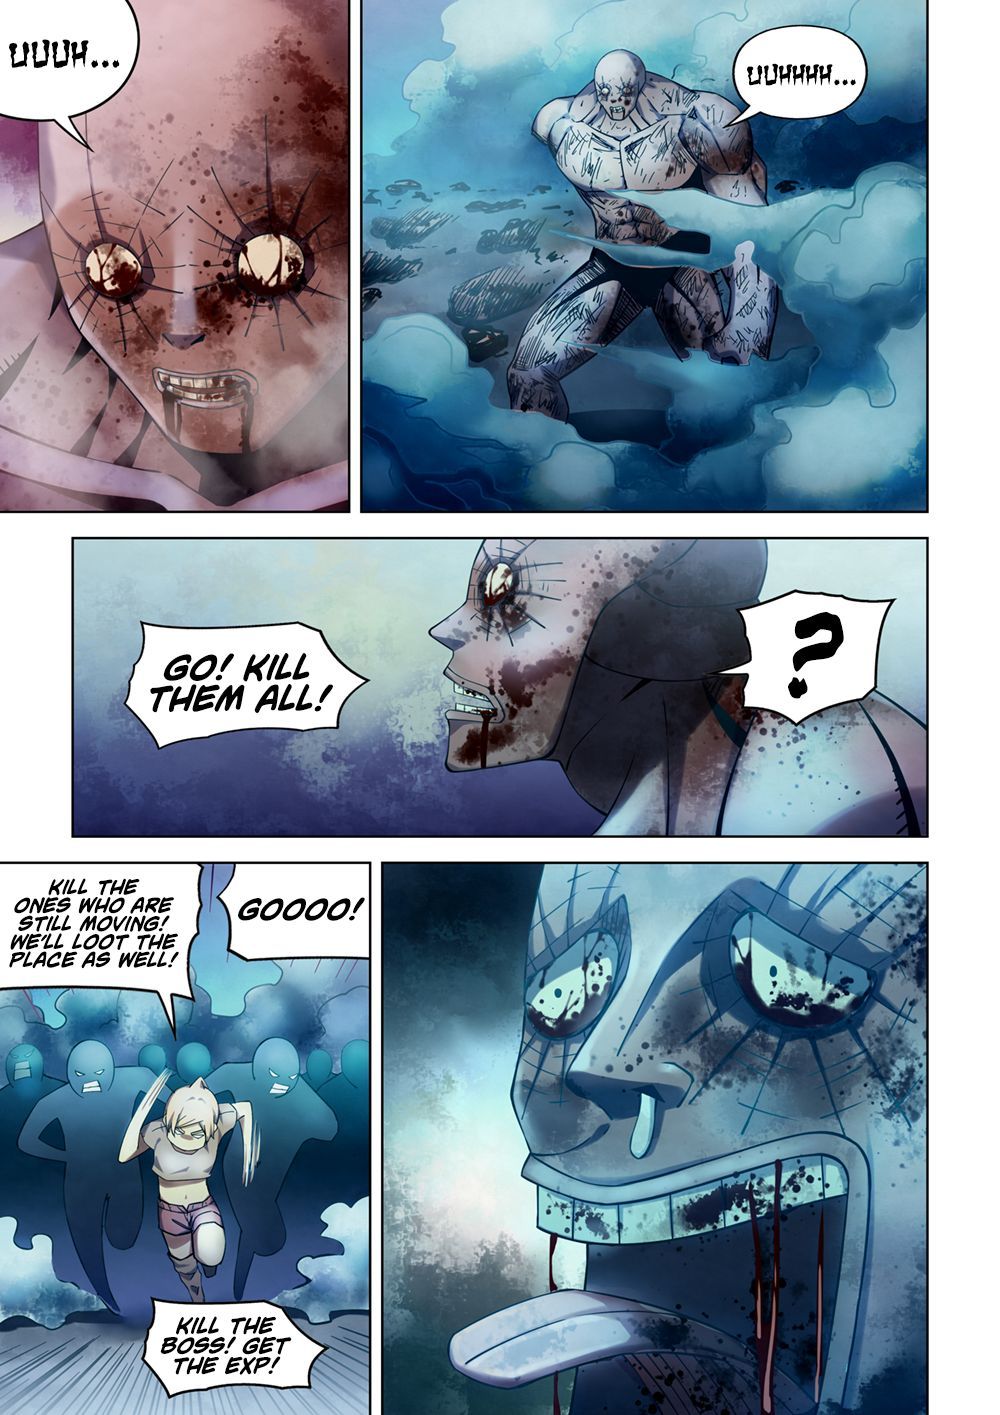 The Last Human Chapter 283 - Page 12